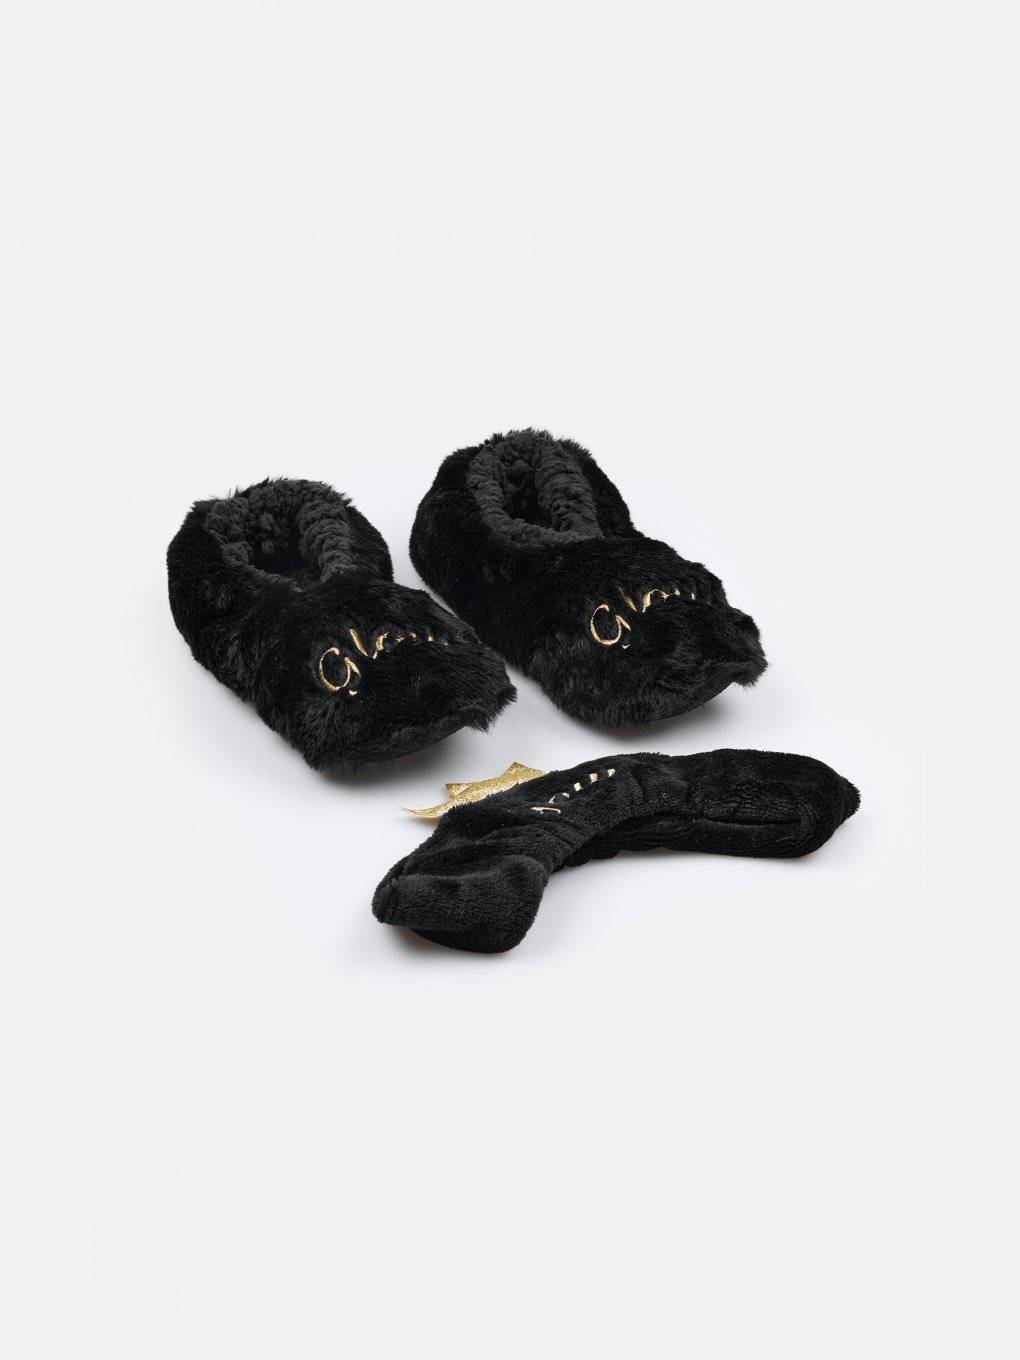 Pack of slippers and cosmetic headband